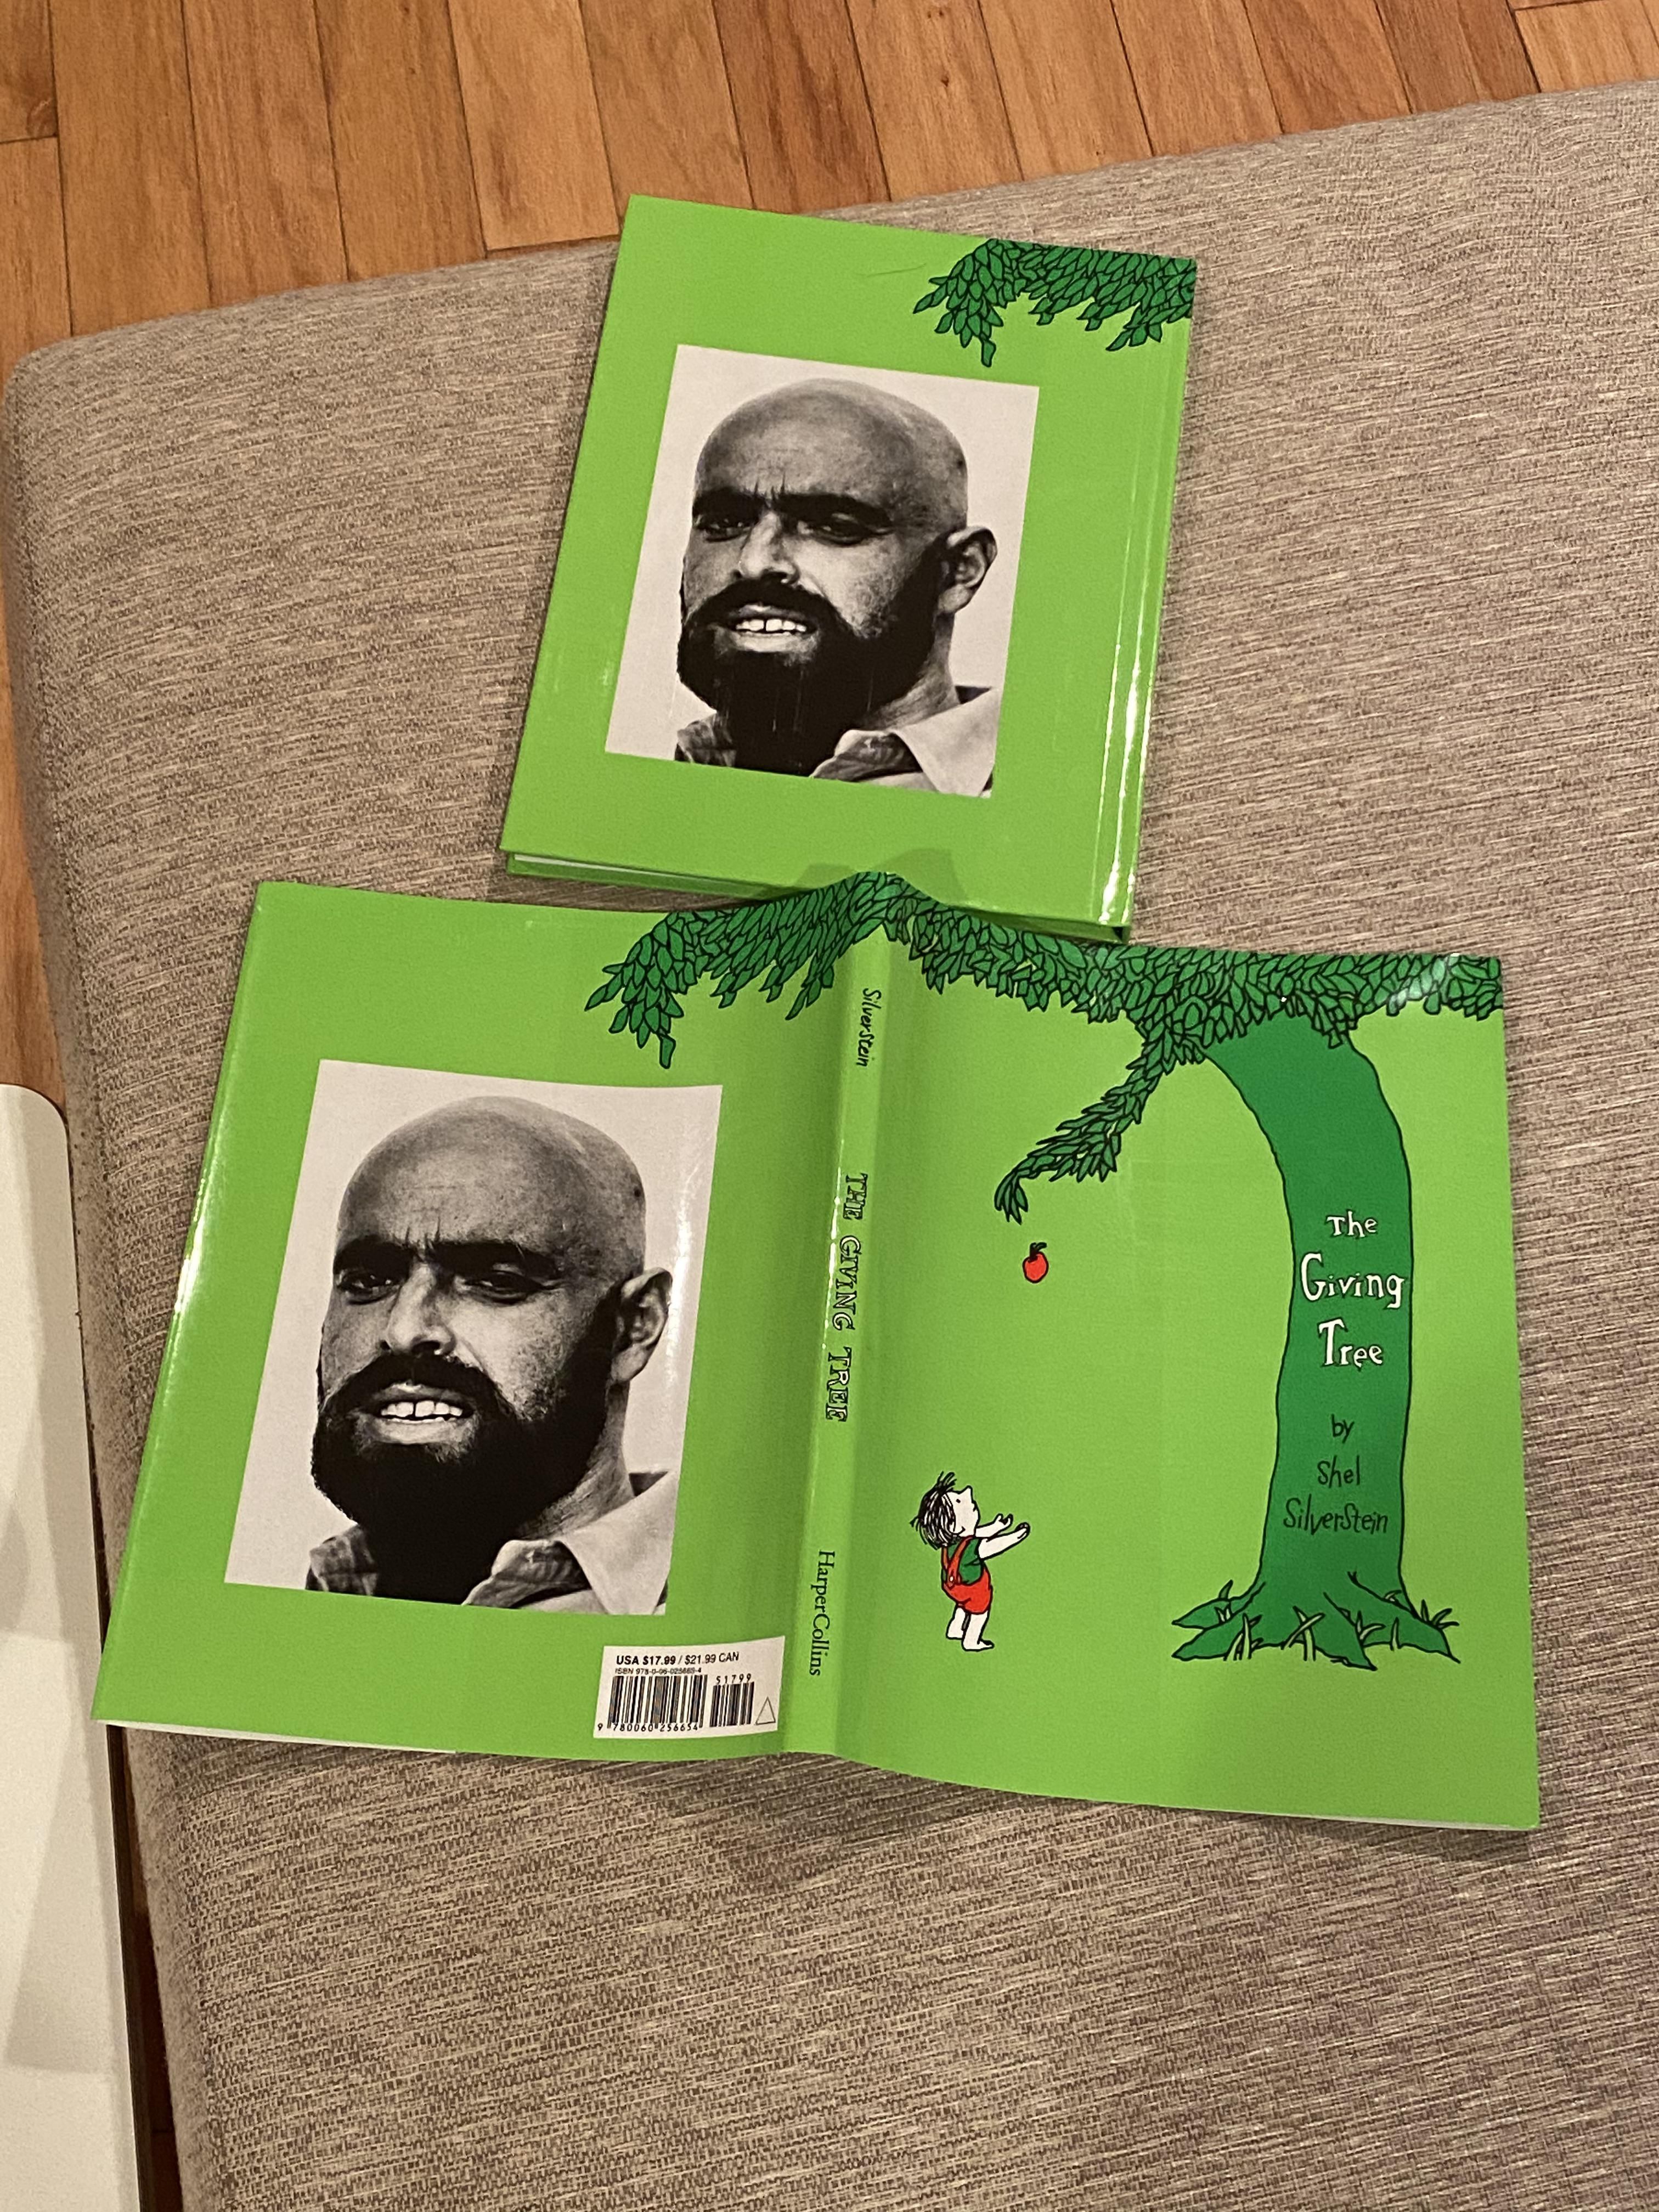 If you think you can just remove the dust jacket to get rid of the unnecessary 5" x 7" portrait of Shel Silverstein in your house, you're mistaken.